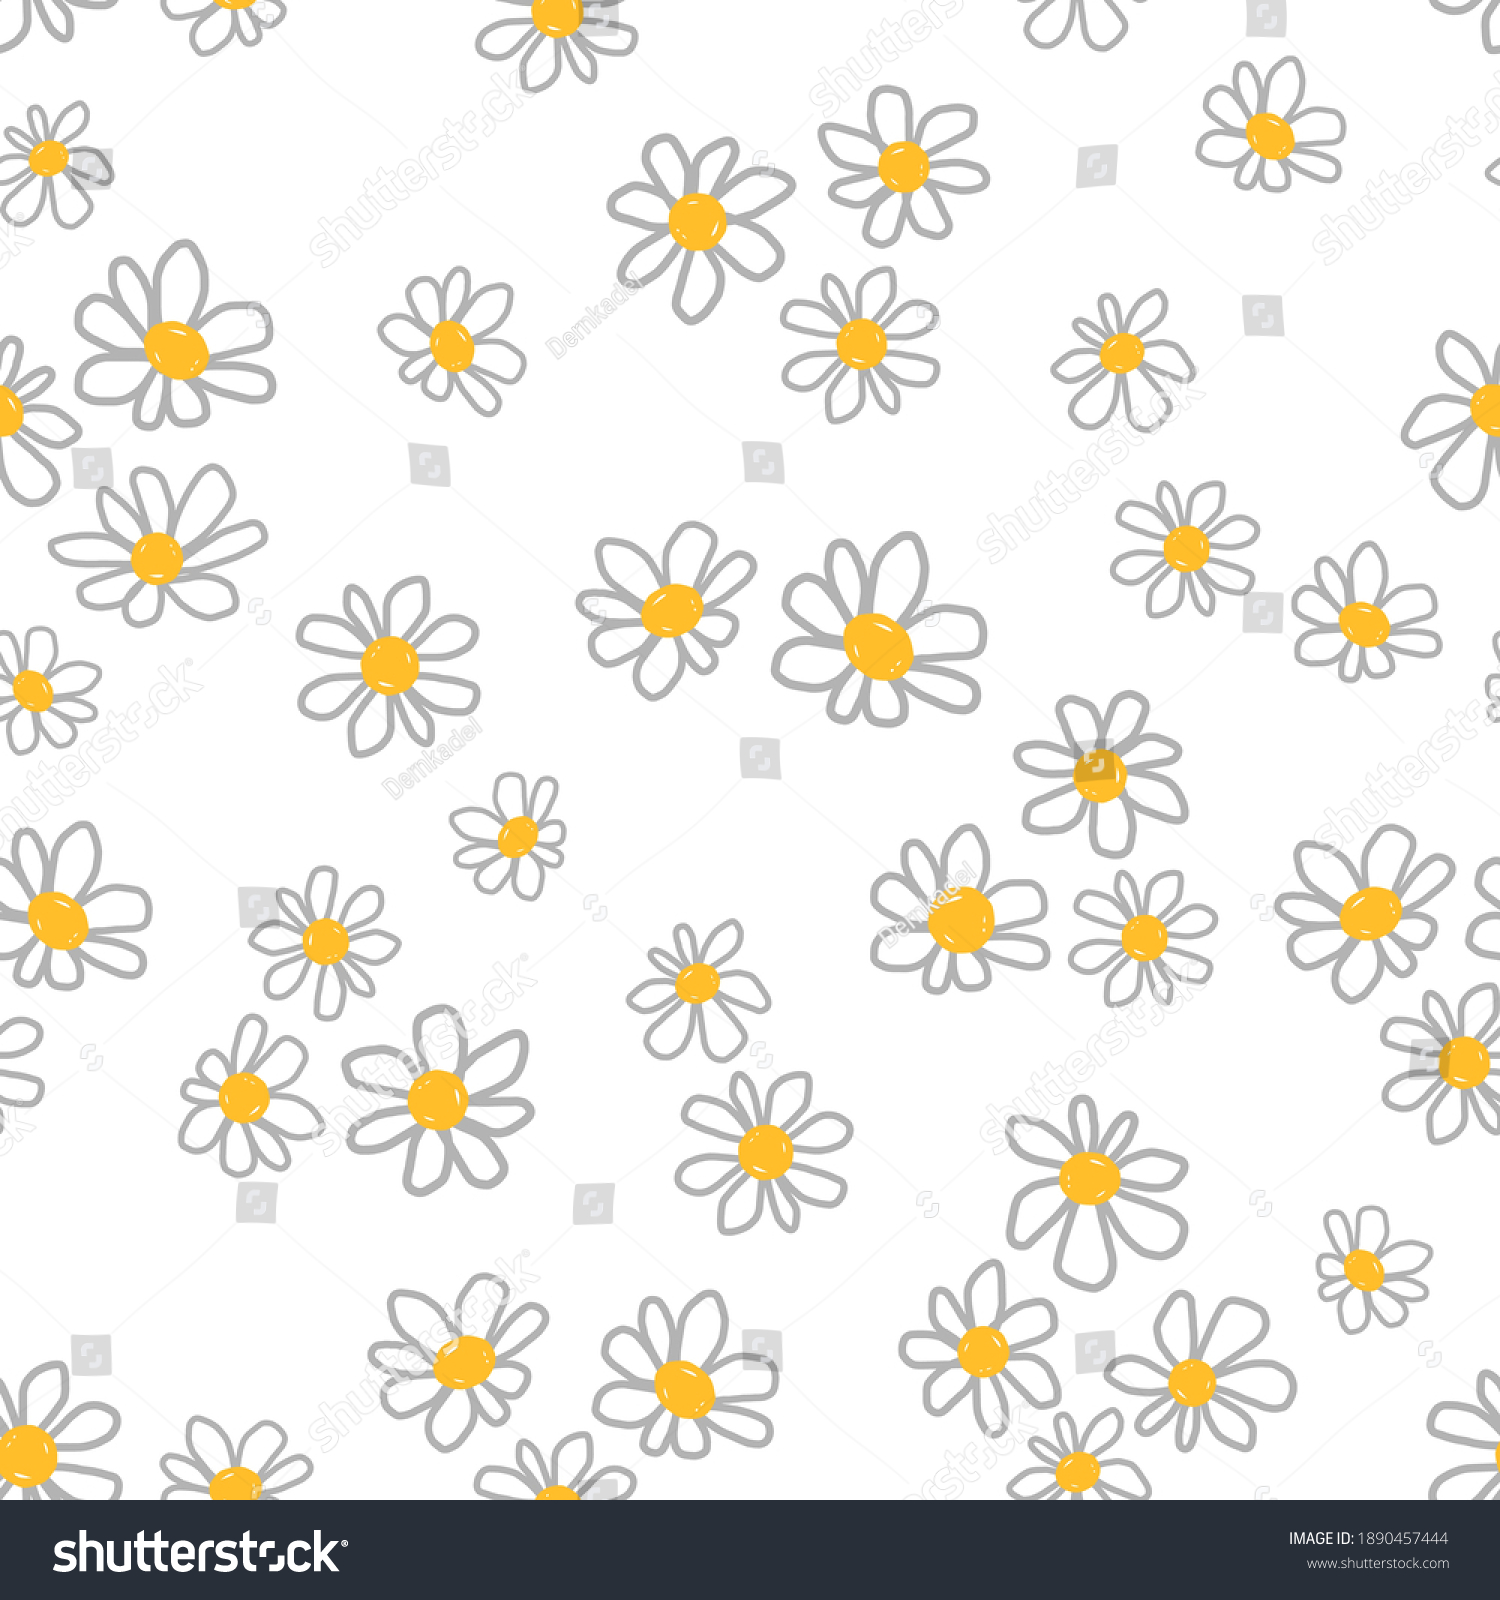 7,207 Yellow daisy doodle Images, Stock Photos & Vectors | Shutterstock